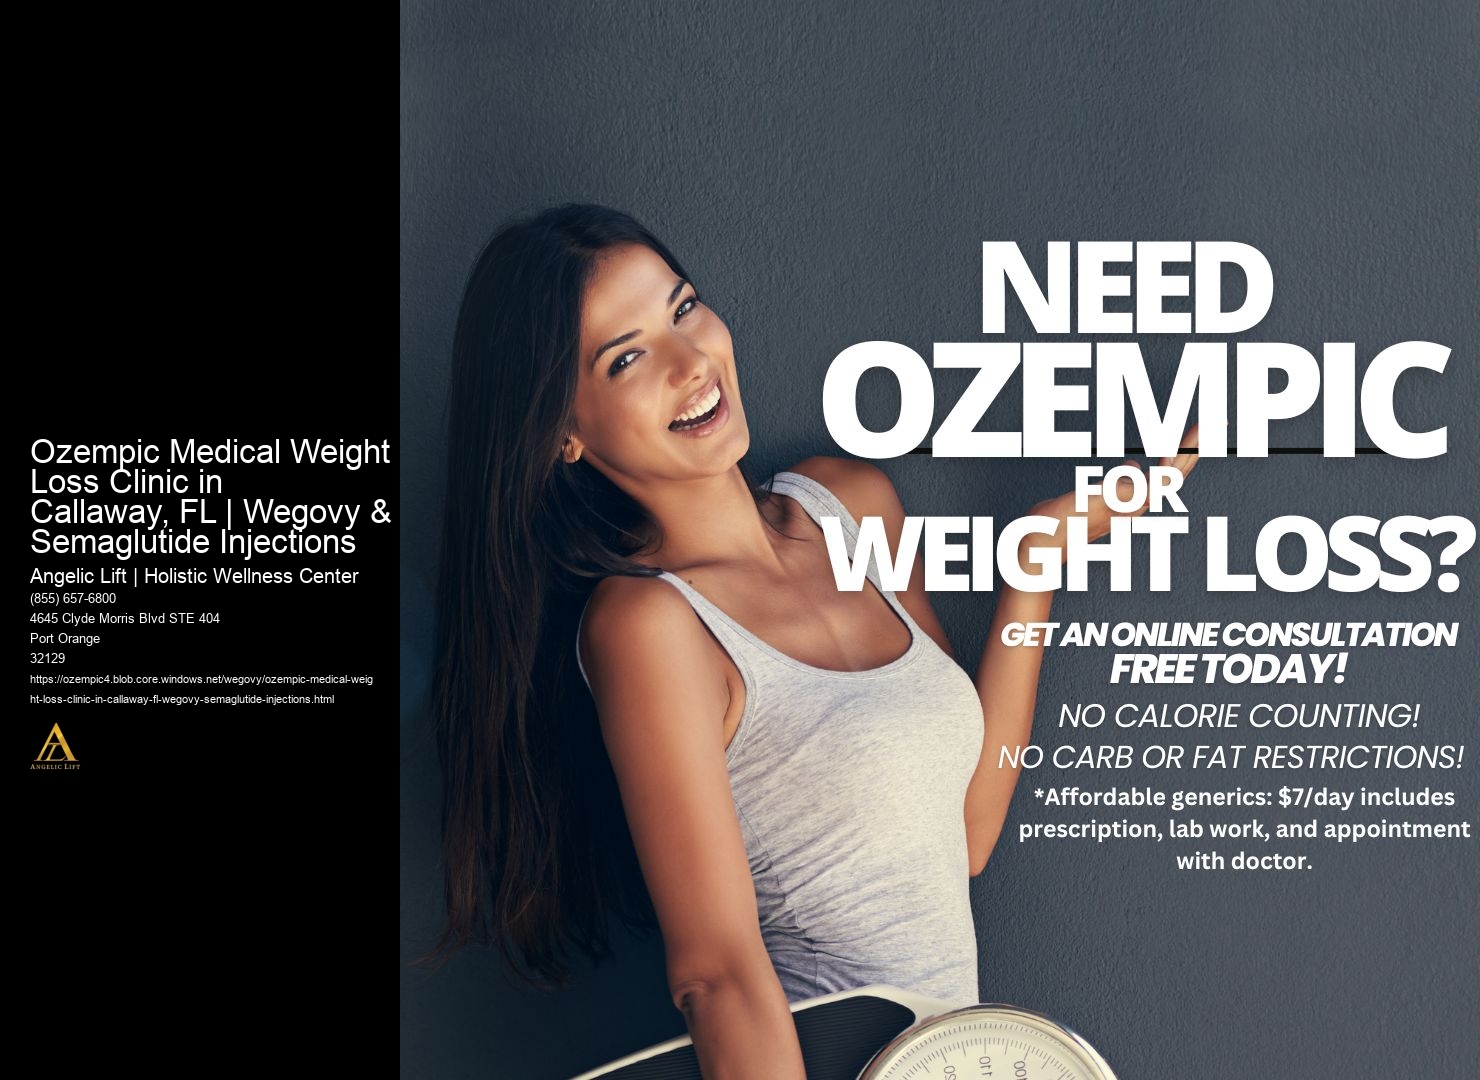 Ozempic Medical Weight Loss Clinic in Callaway, FL | Wegovy & Semaglutide Injections